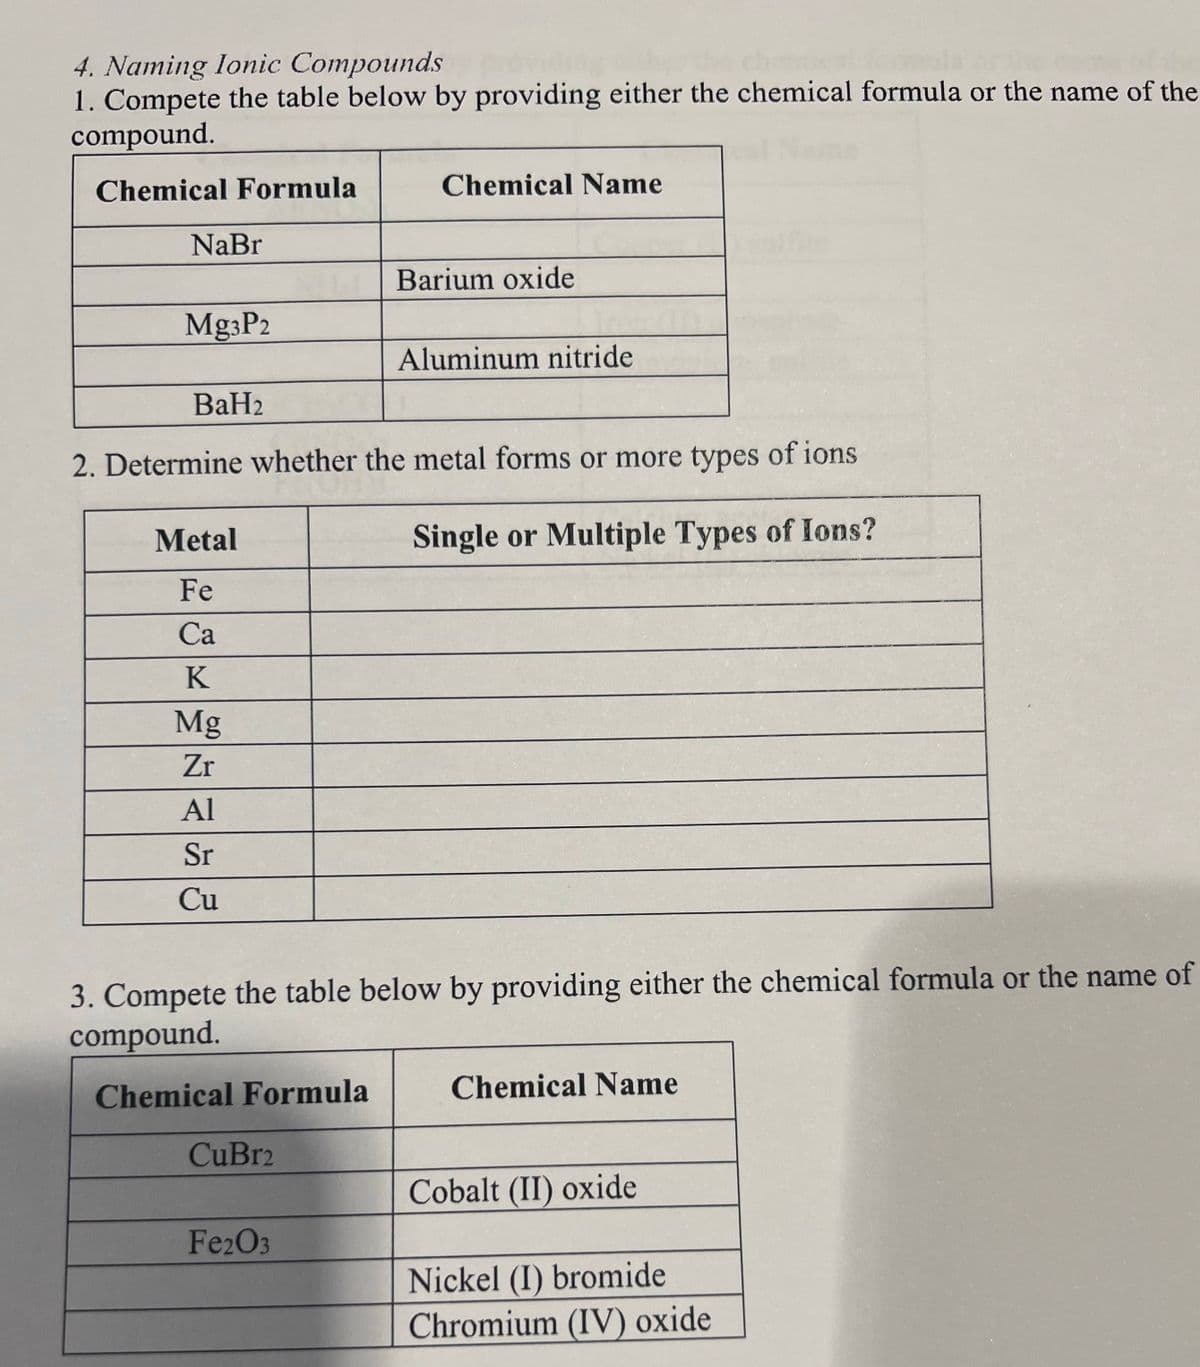 4. Naming lonic Compounds
1. Compete the table below by providing either the chemical formula or the name of the
compound.
Chemical Formula
Chemical Name
NaBr
Barium oxide
Mg3P2
Aluminum nitride
BaH2
2. Determine whether the metal forms or more types of ions
Metal
Single or Multiple Types of Ions?
Fe
Ca
K
Mg
Zr
Al
Sr
Cu
3. Compete the table below by providing either the chemical formula or the name of
compound.
Chemical Formula
Chemical Name
CuBr2
Cobalt (II) oxide
Fe2O3
Nickel (I) bromide
Chromium (IV) oxide
